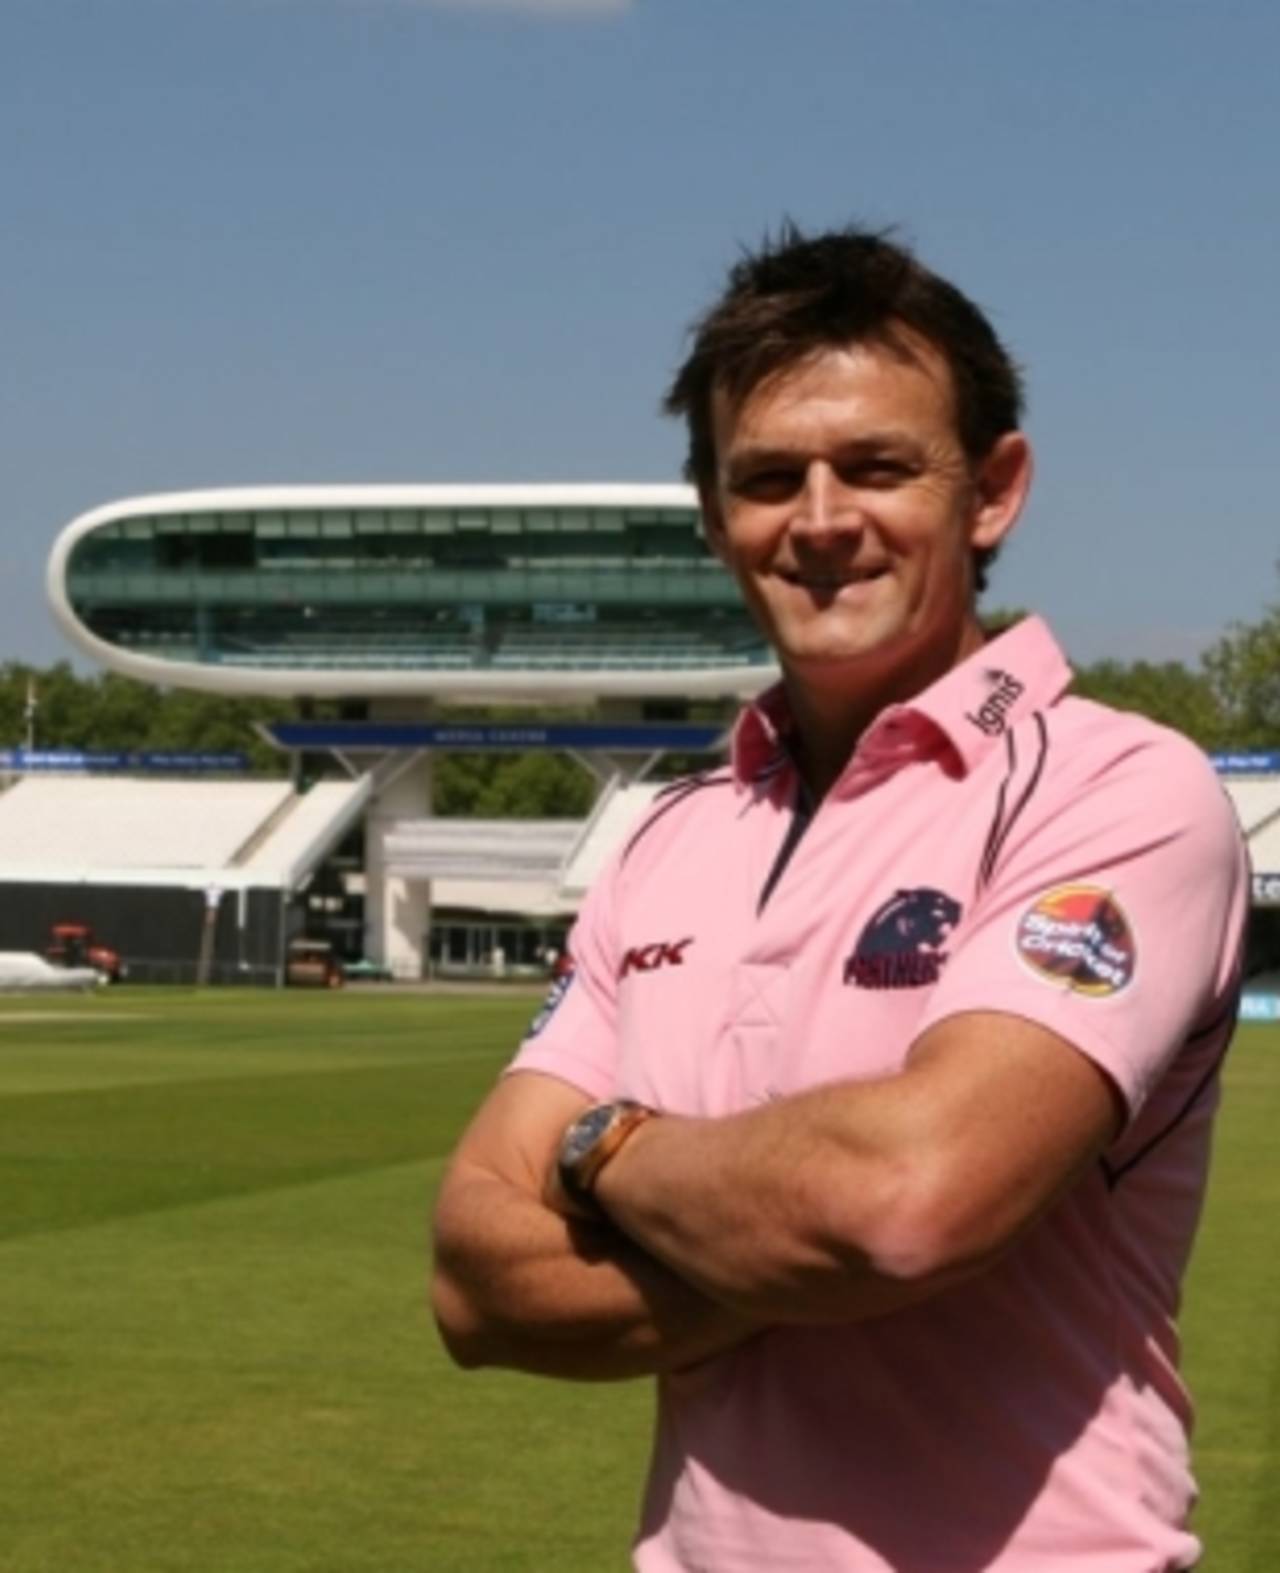 Adam Gilchrist will be playing county cricket for the first time in this year's domestic Twenty20 cup